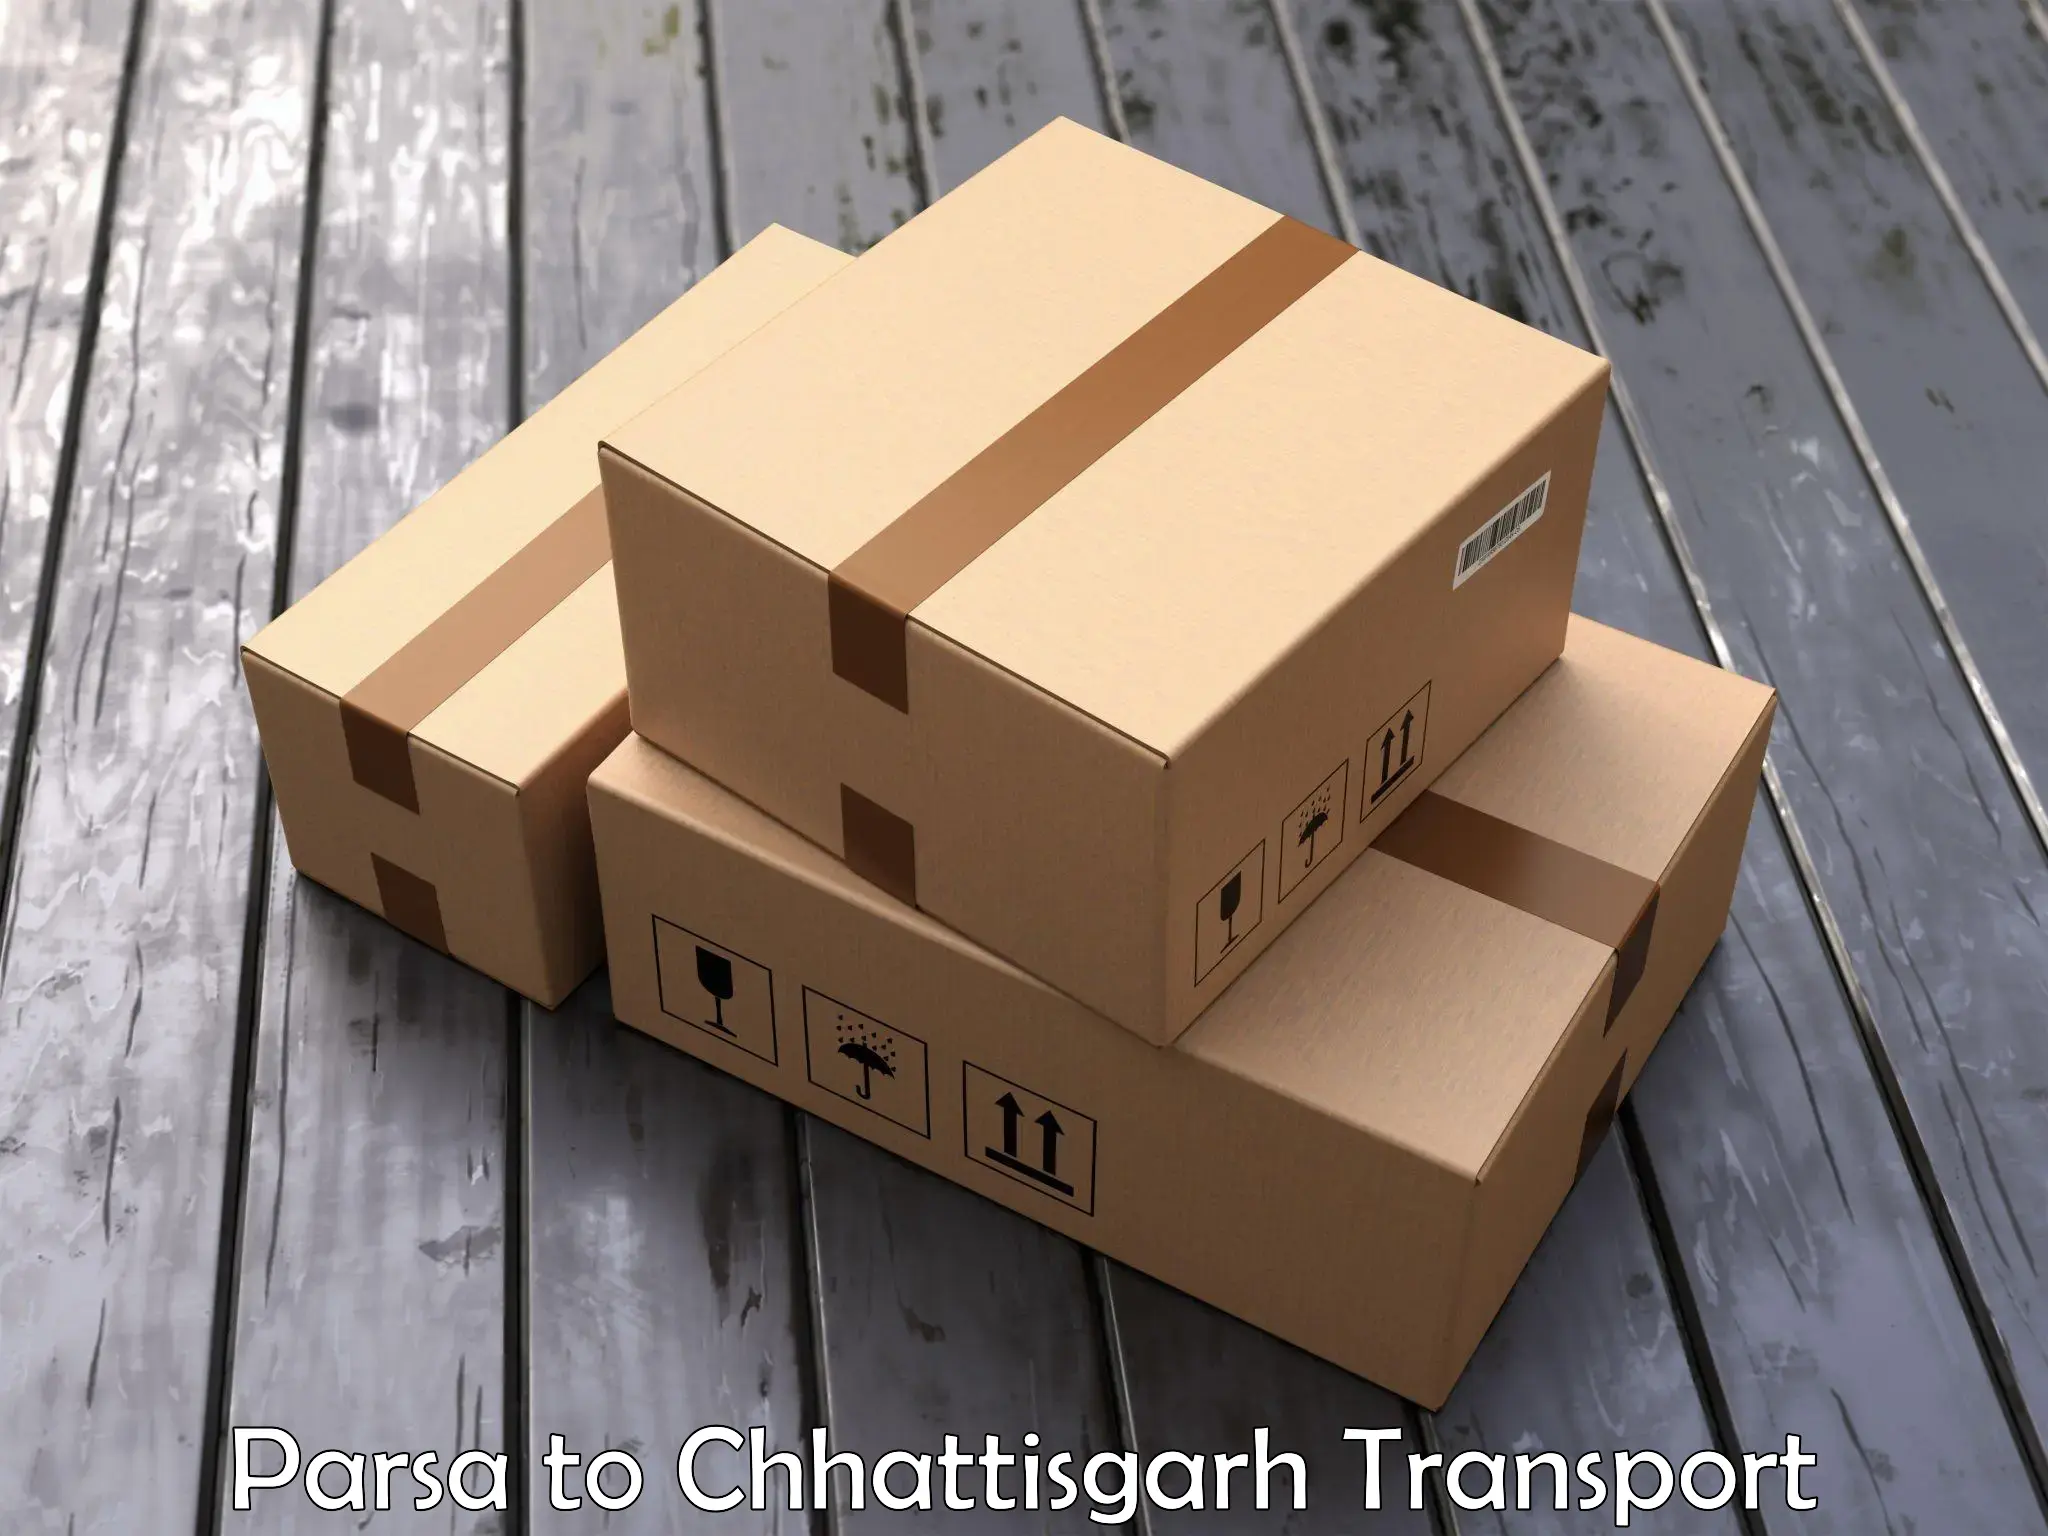 Air freight transport services in Parsa to Dhamtari